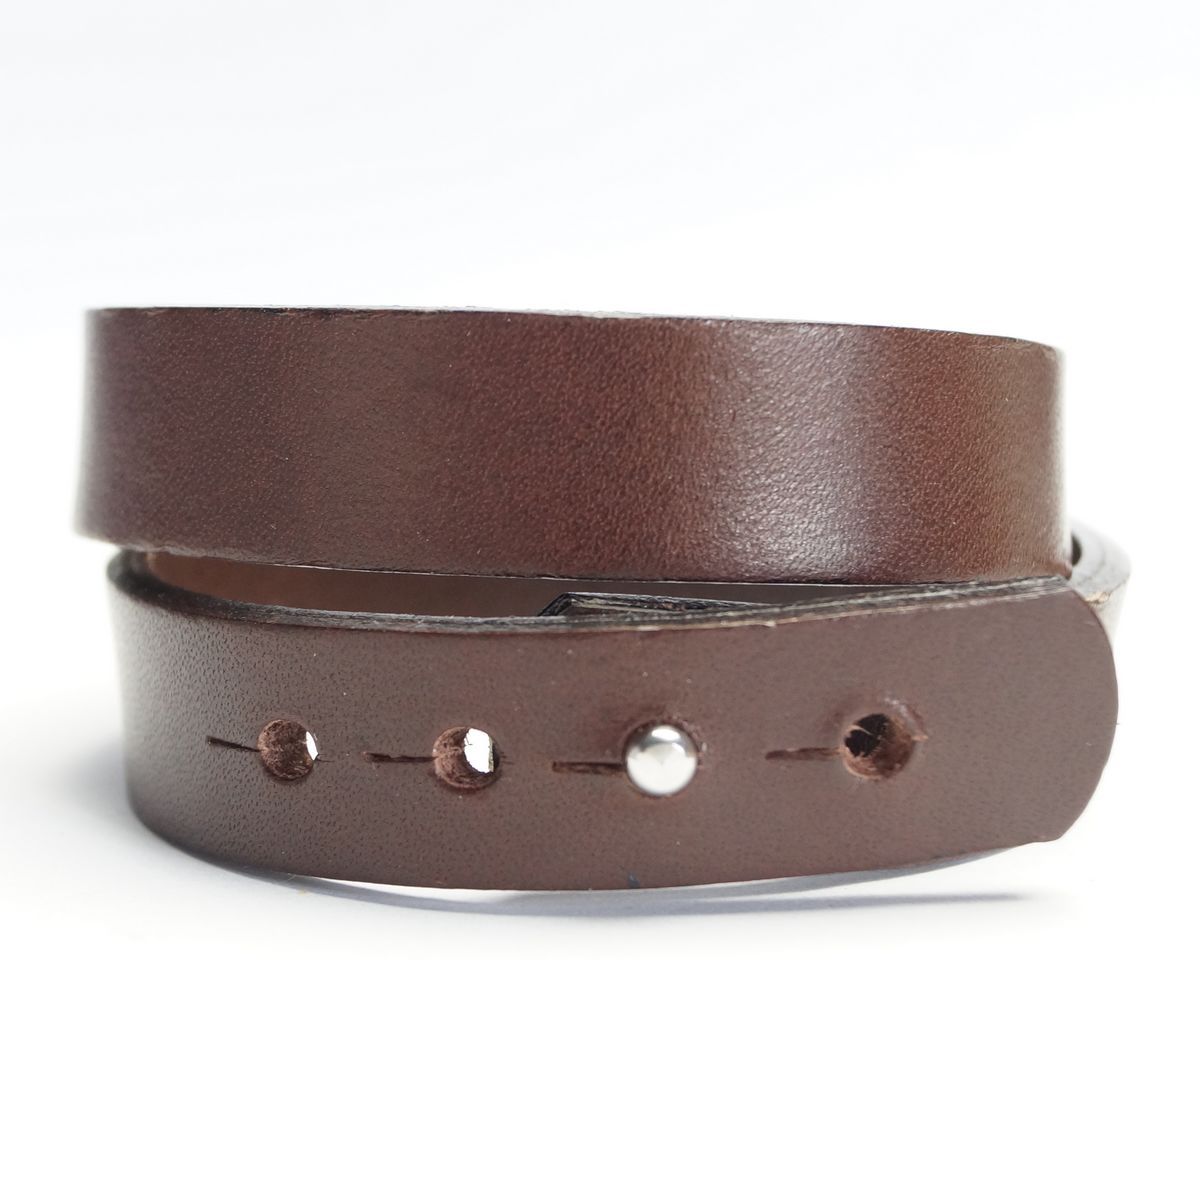 Buy Double Leather Bracelet - Dark Brown for 149.00 in The Prince Webshop